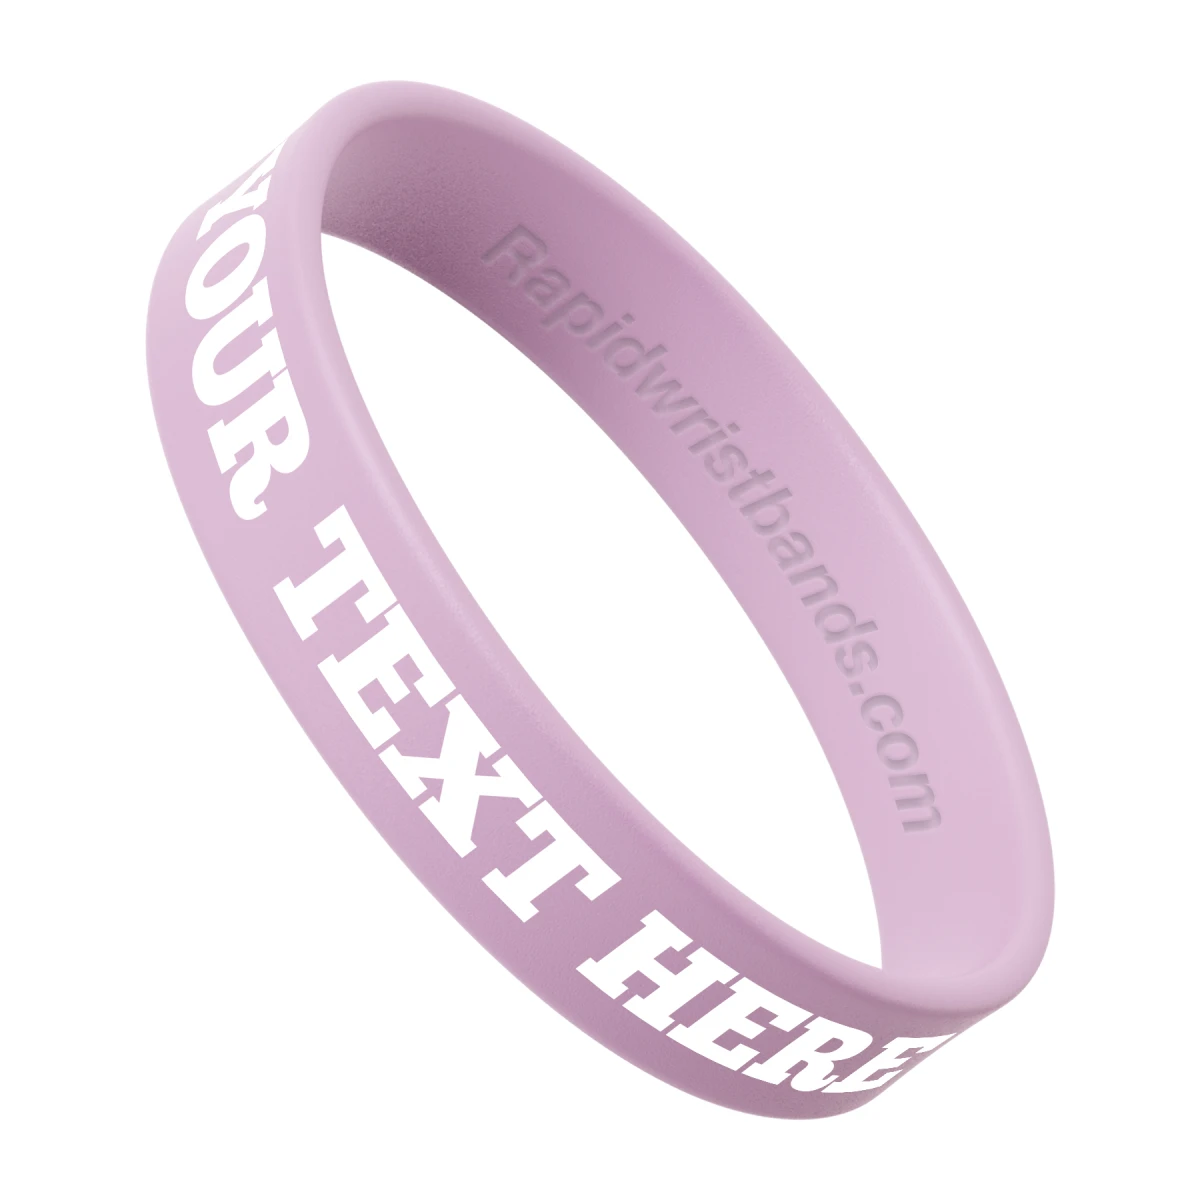 Light Pink Wristband With Your Text Here Printed In White